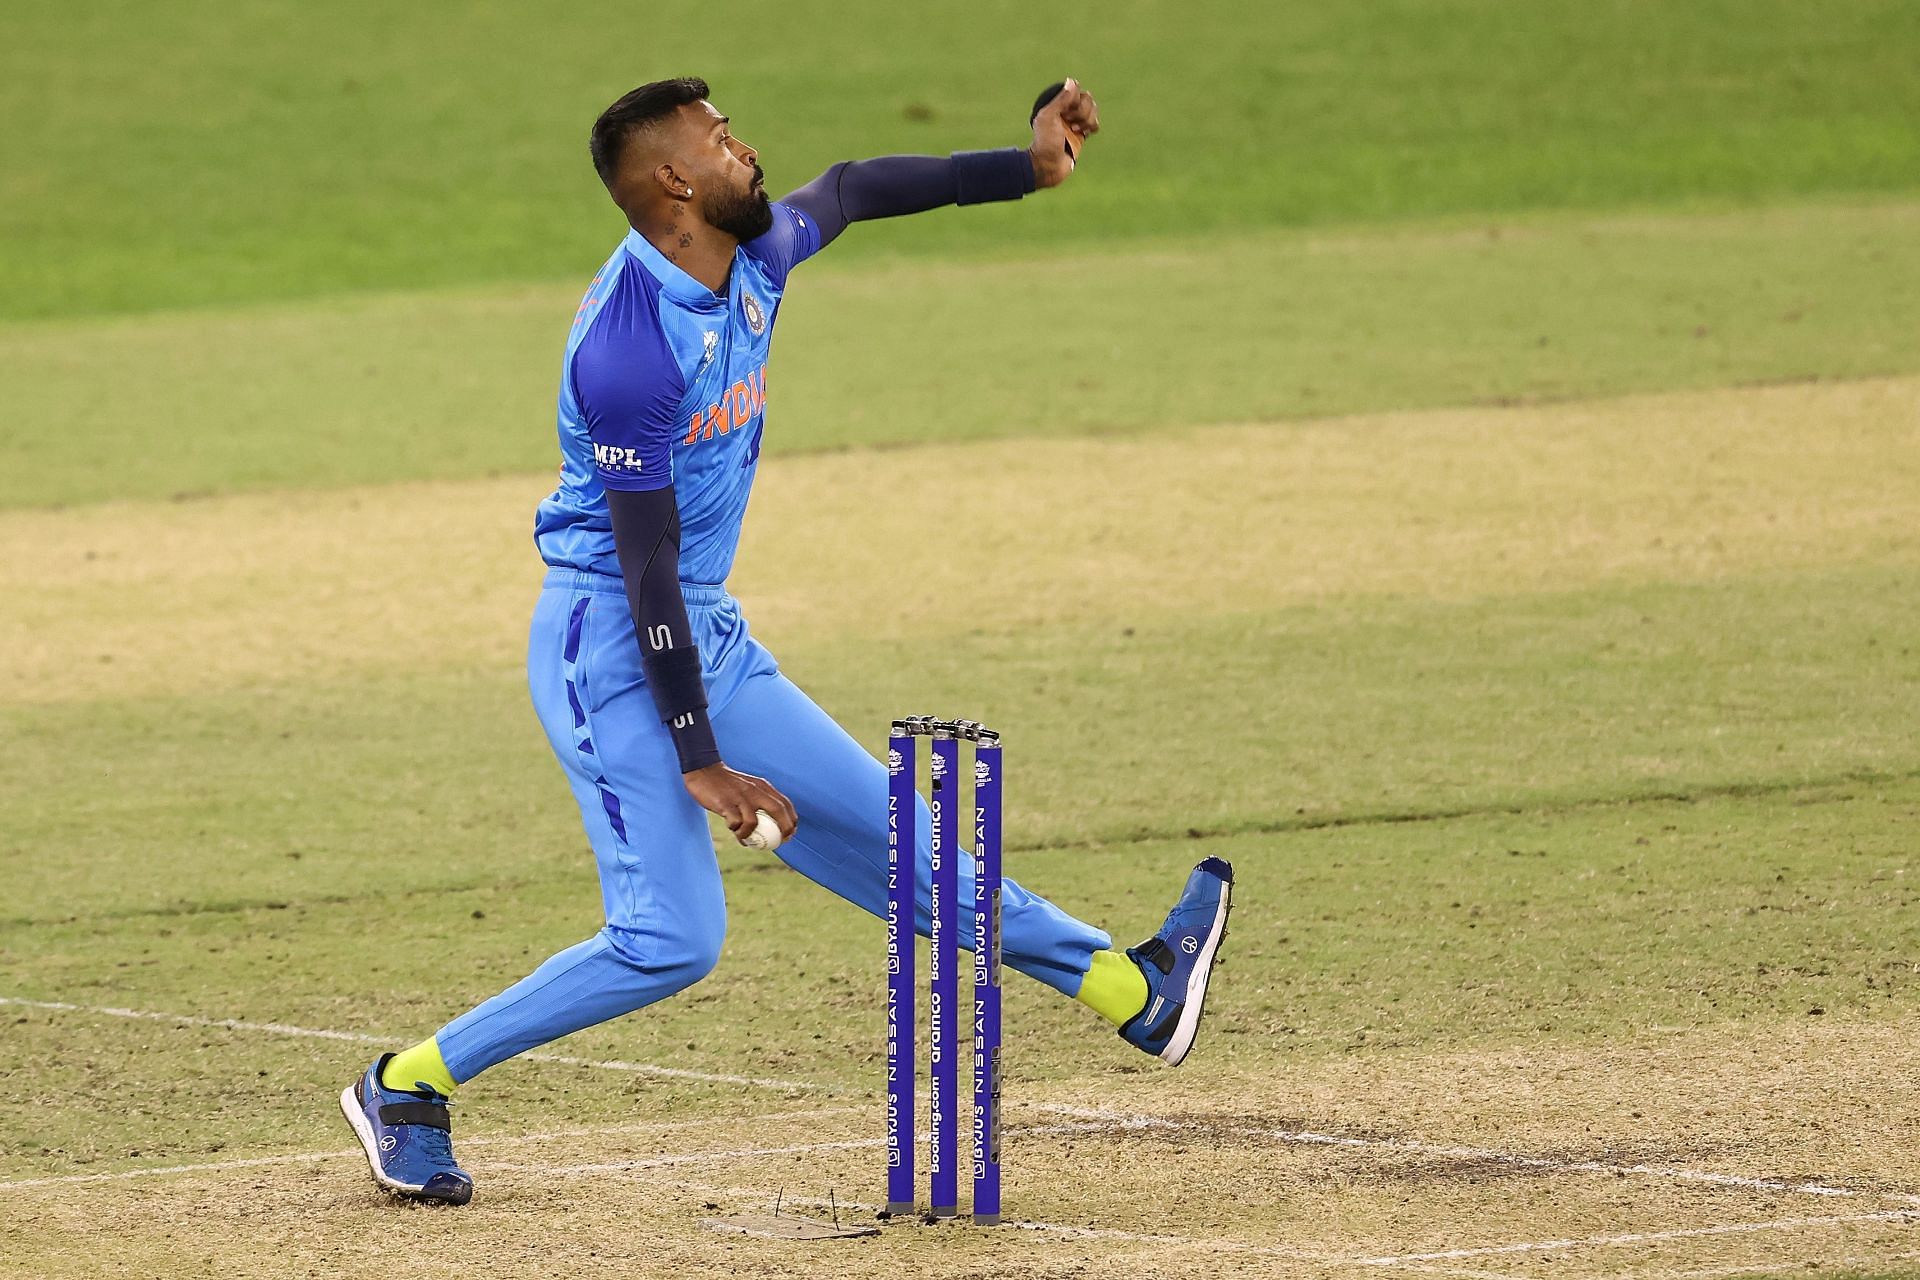 Hardik Pandya can be the third seamer if India want to play three spinners in their XI.